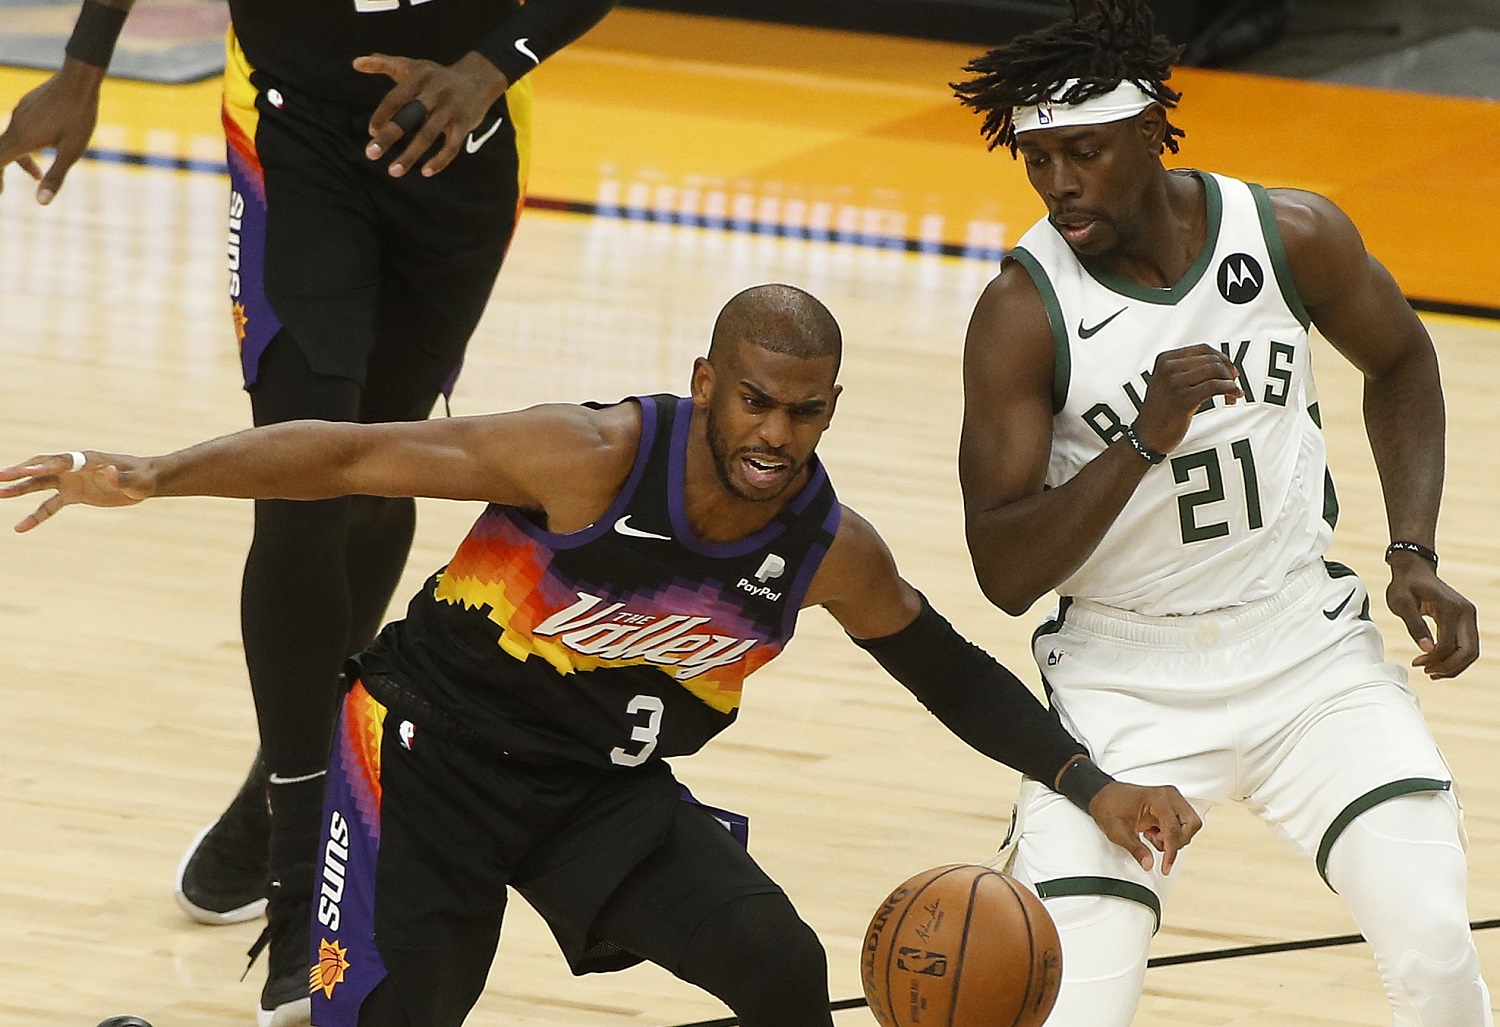 Chris Paul of the Phoenix Suns goes after a loose ball against Jrue Holiday of the Milwaukee Bucks during the first half in Game 2 of the NBA championship series.